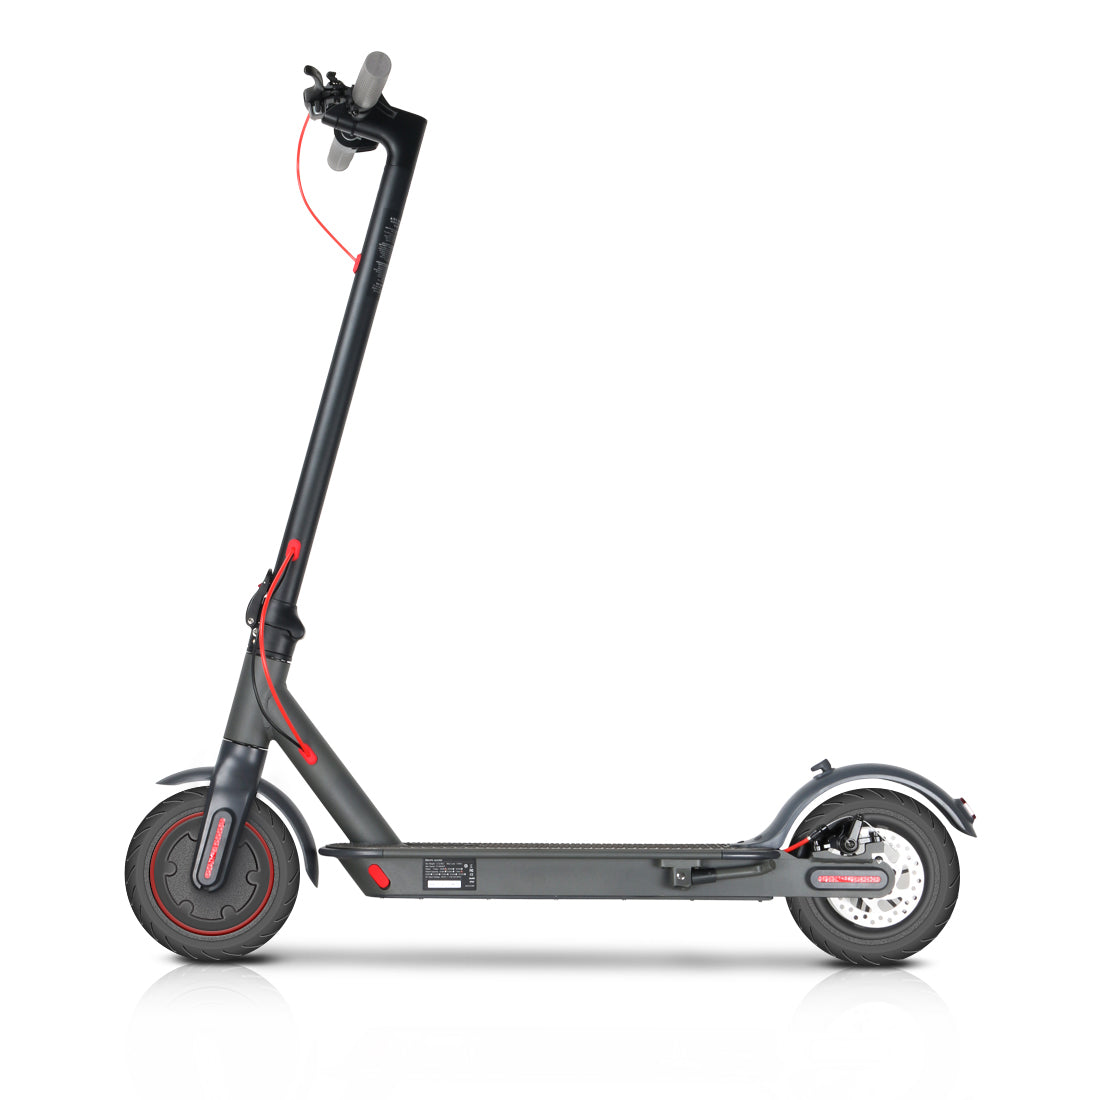 Electric Scooter Adult | 3 Gear Scooter (25 km/h) | MK083 Pro With APP CONTROL 350kw Portable & Foldable Aluminium Scooter | Cruise Control, Waterproof Grade IP65